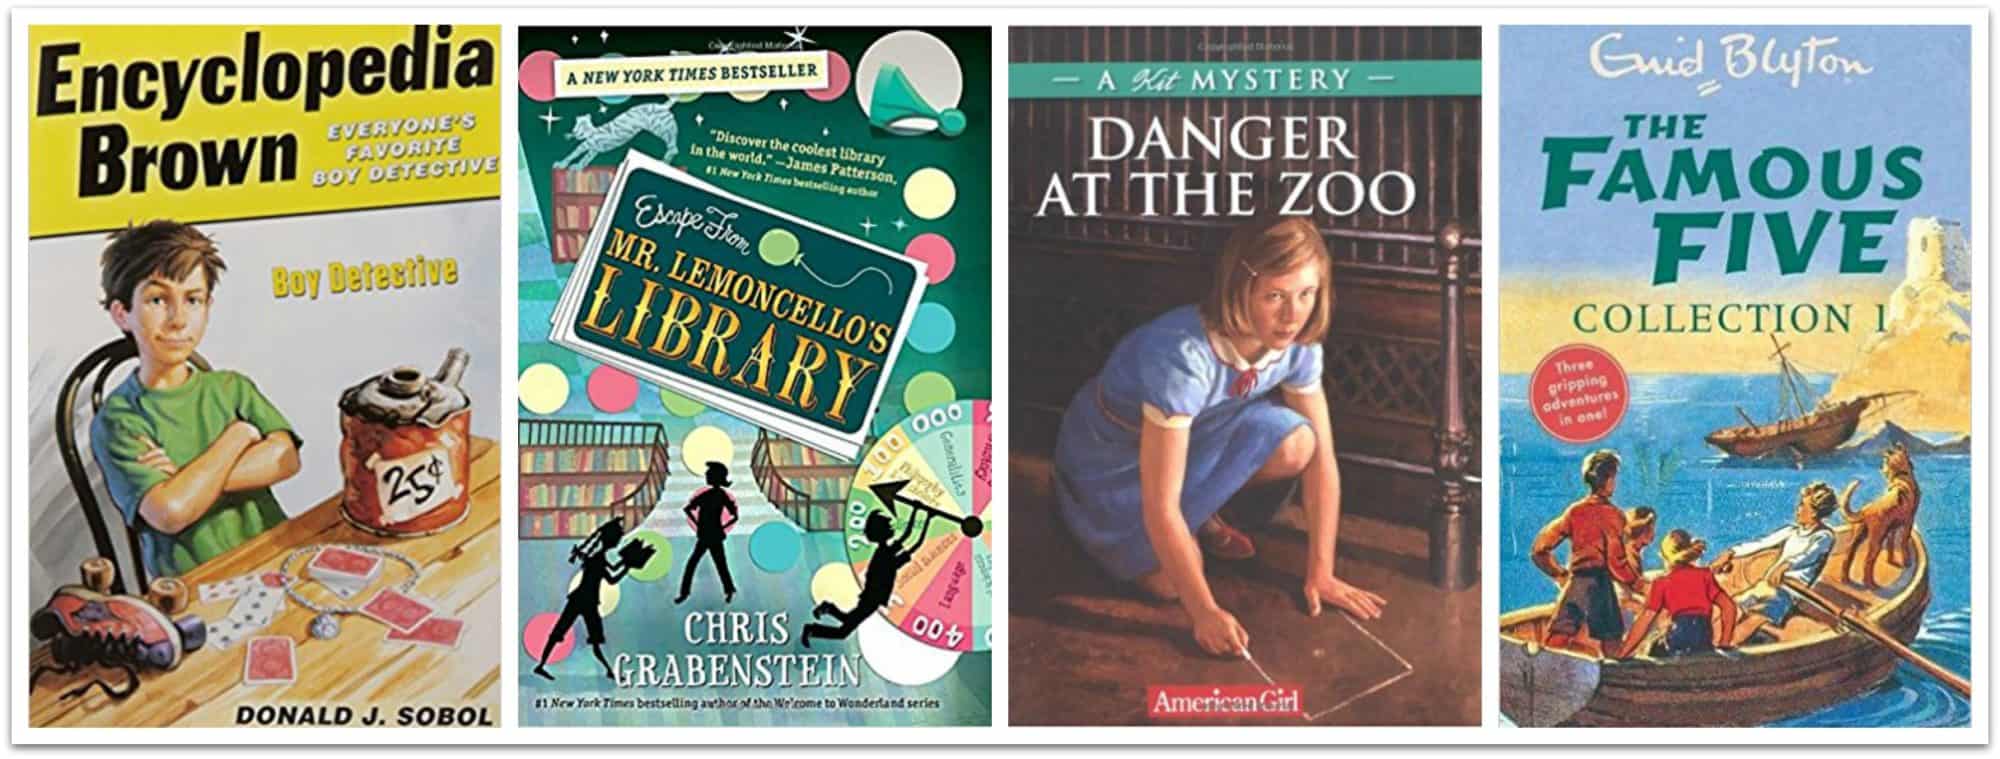 Encyclopedia Brown, the Famous Five Collection by Enid Blyton, American Girl Mystery, and Mr. Lemoncello's Library.